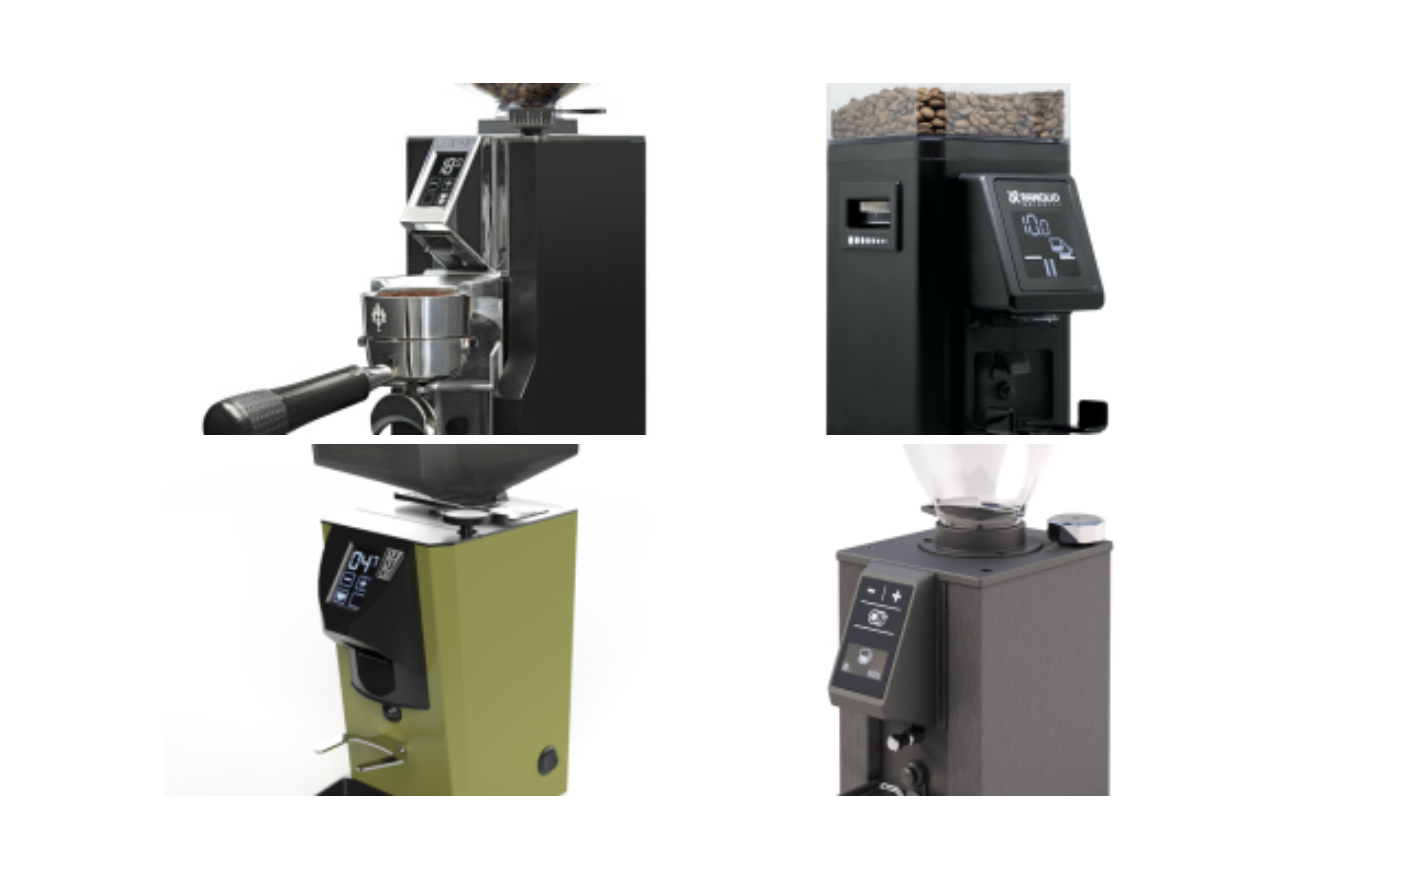 New Rectangular Grinders From Italy are Circling the Home MarketDaily Coffee News by Roast Magazine